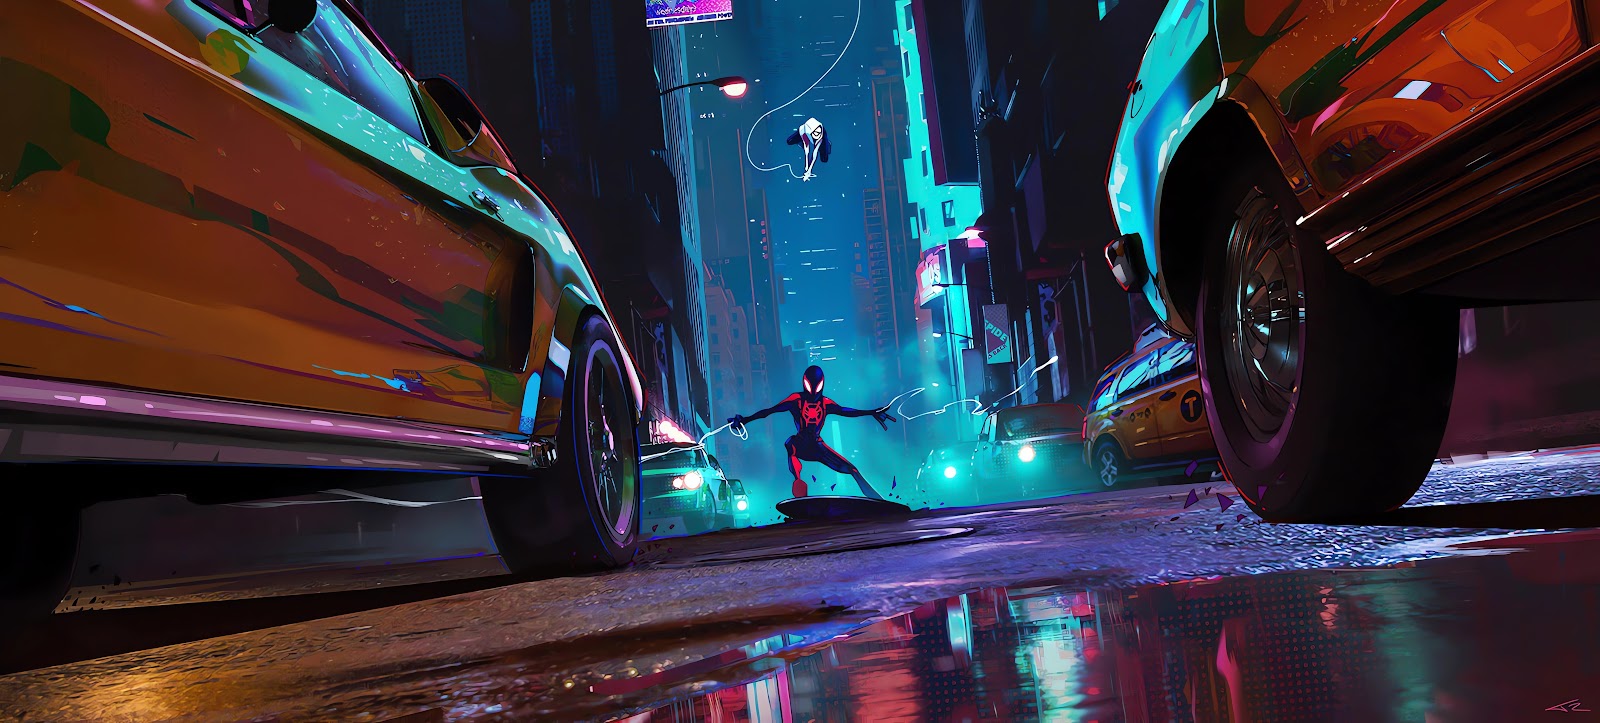 toplist Spider-Man and Spider-Gwen in the City 4K Wallpaper for PC